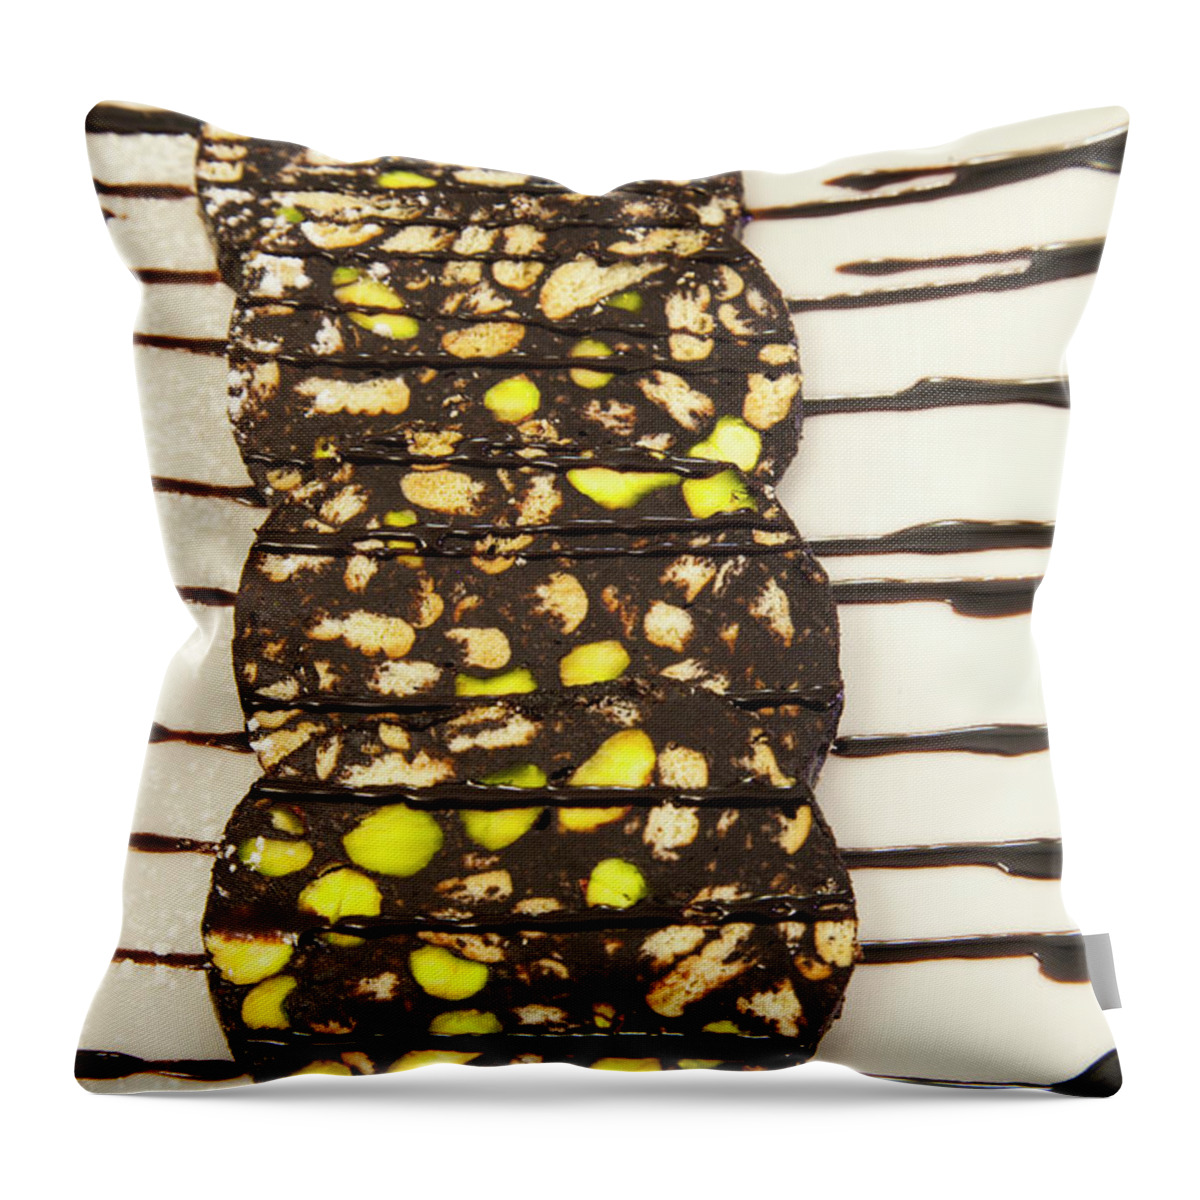 Temptation Throw Pillow featuring the photograph Dessert With Chocolate by Gonzalo Azumendi